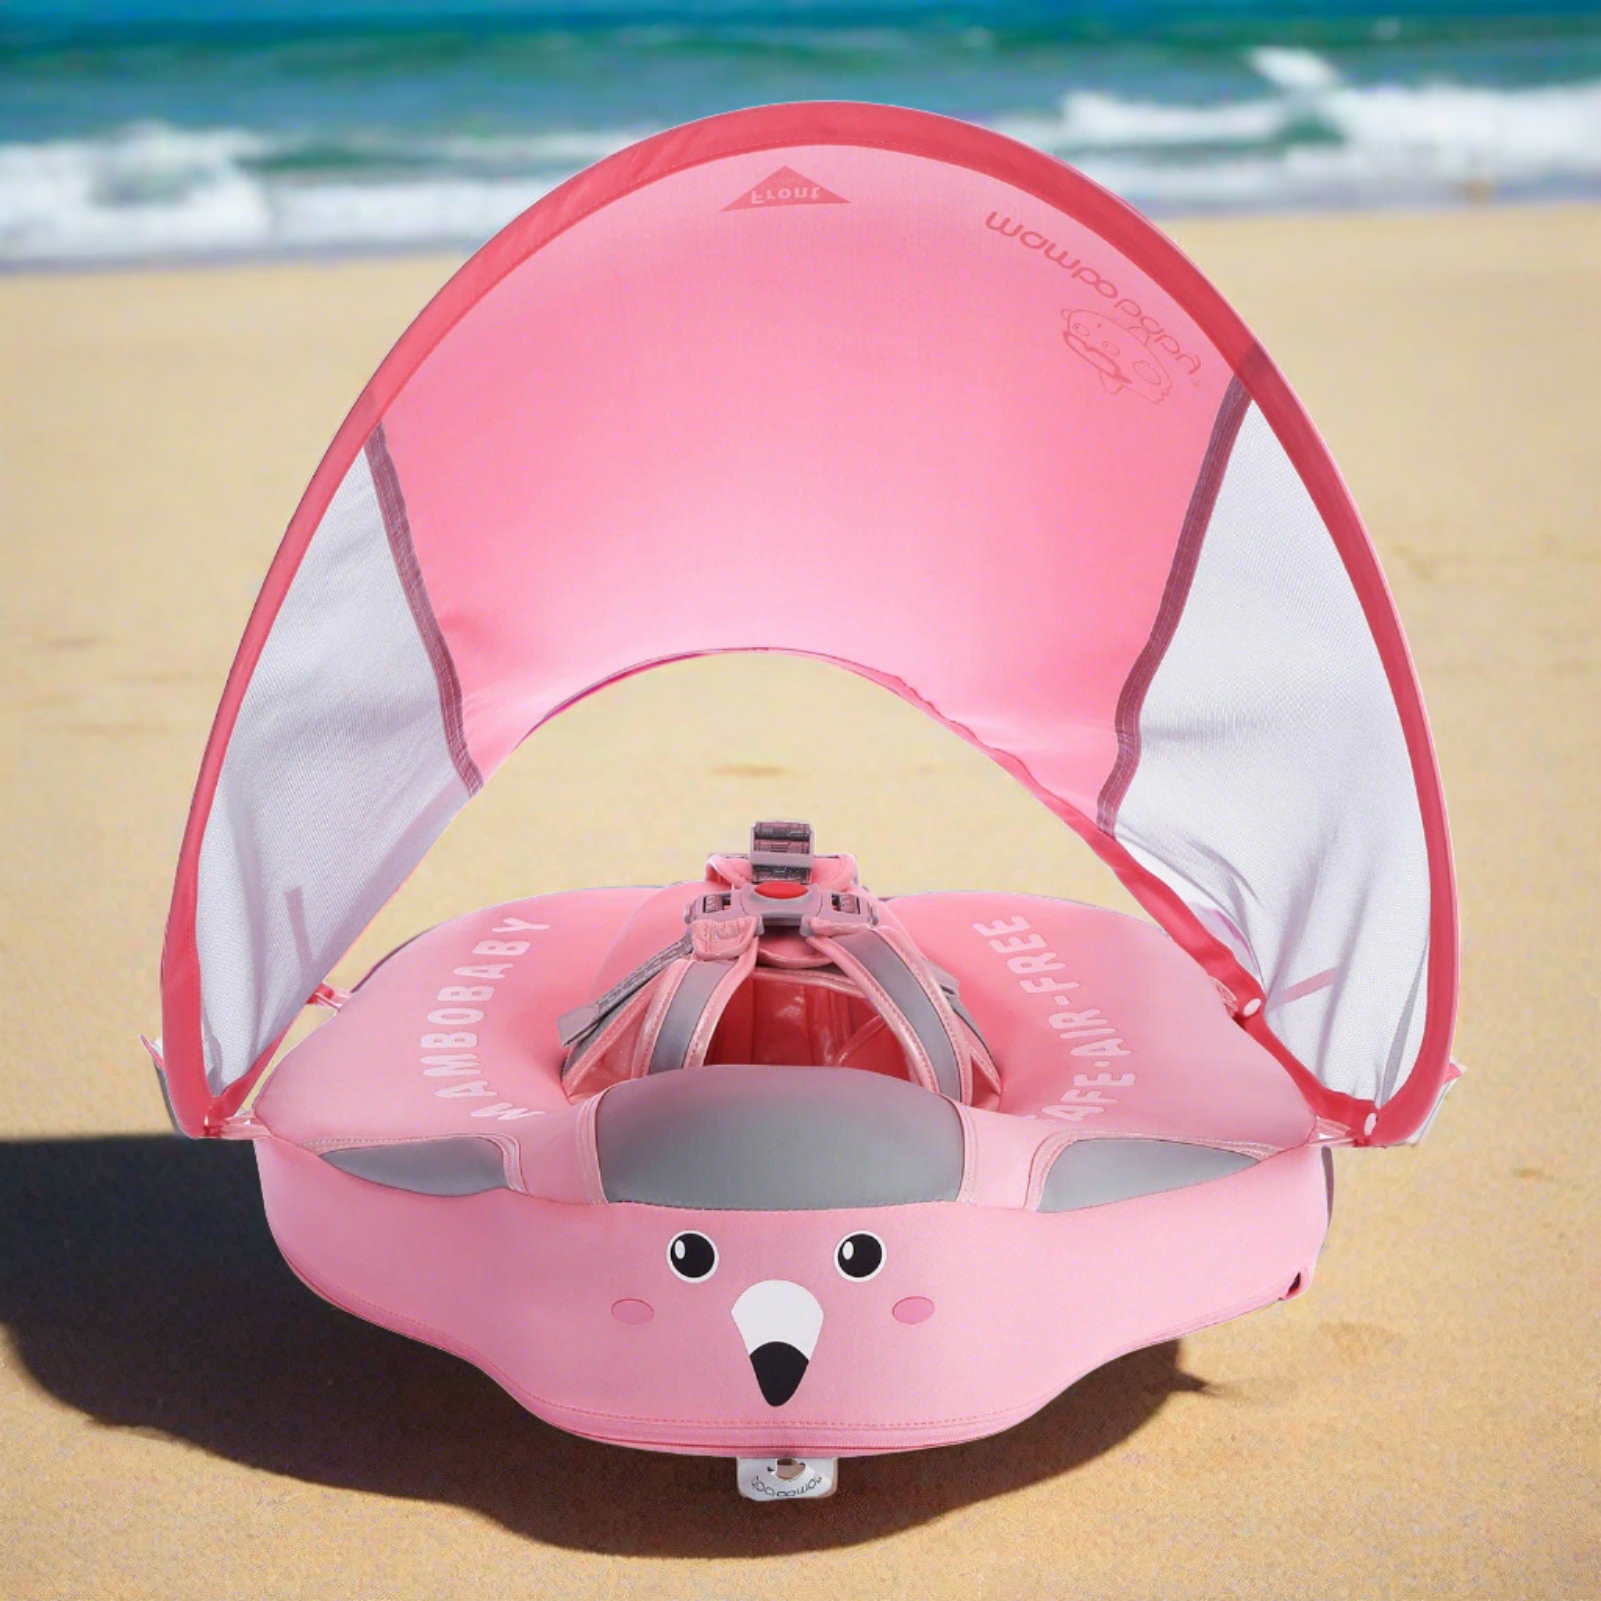 AquaGuard: Infant & Toddler Swim Trainer with Safety Canopy - Pool Float